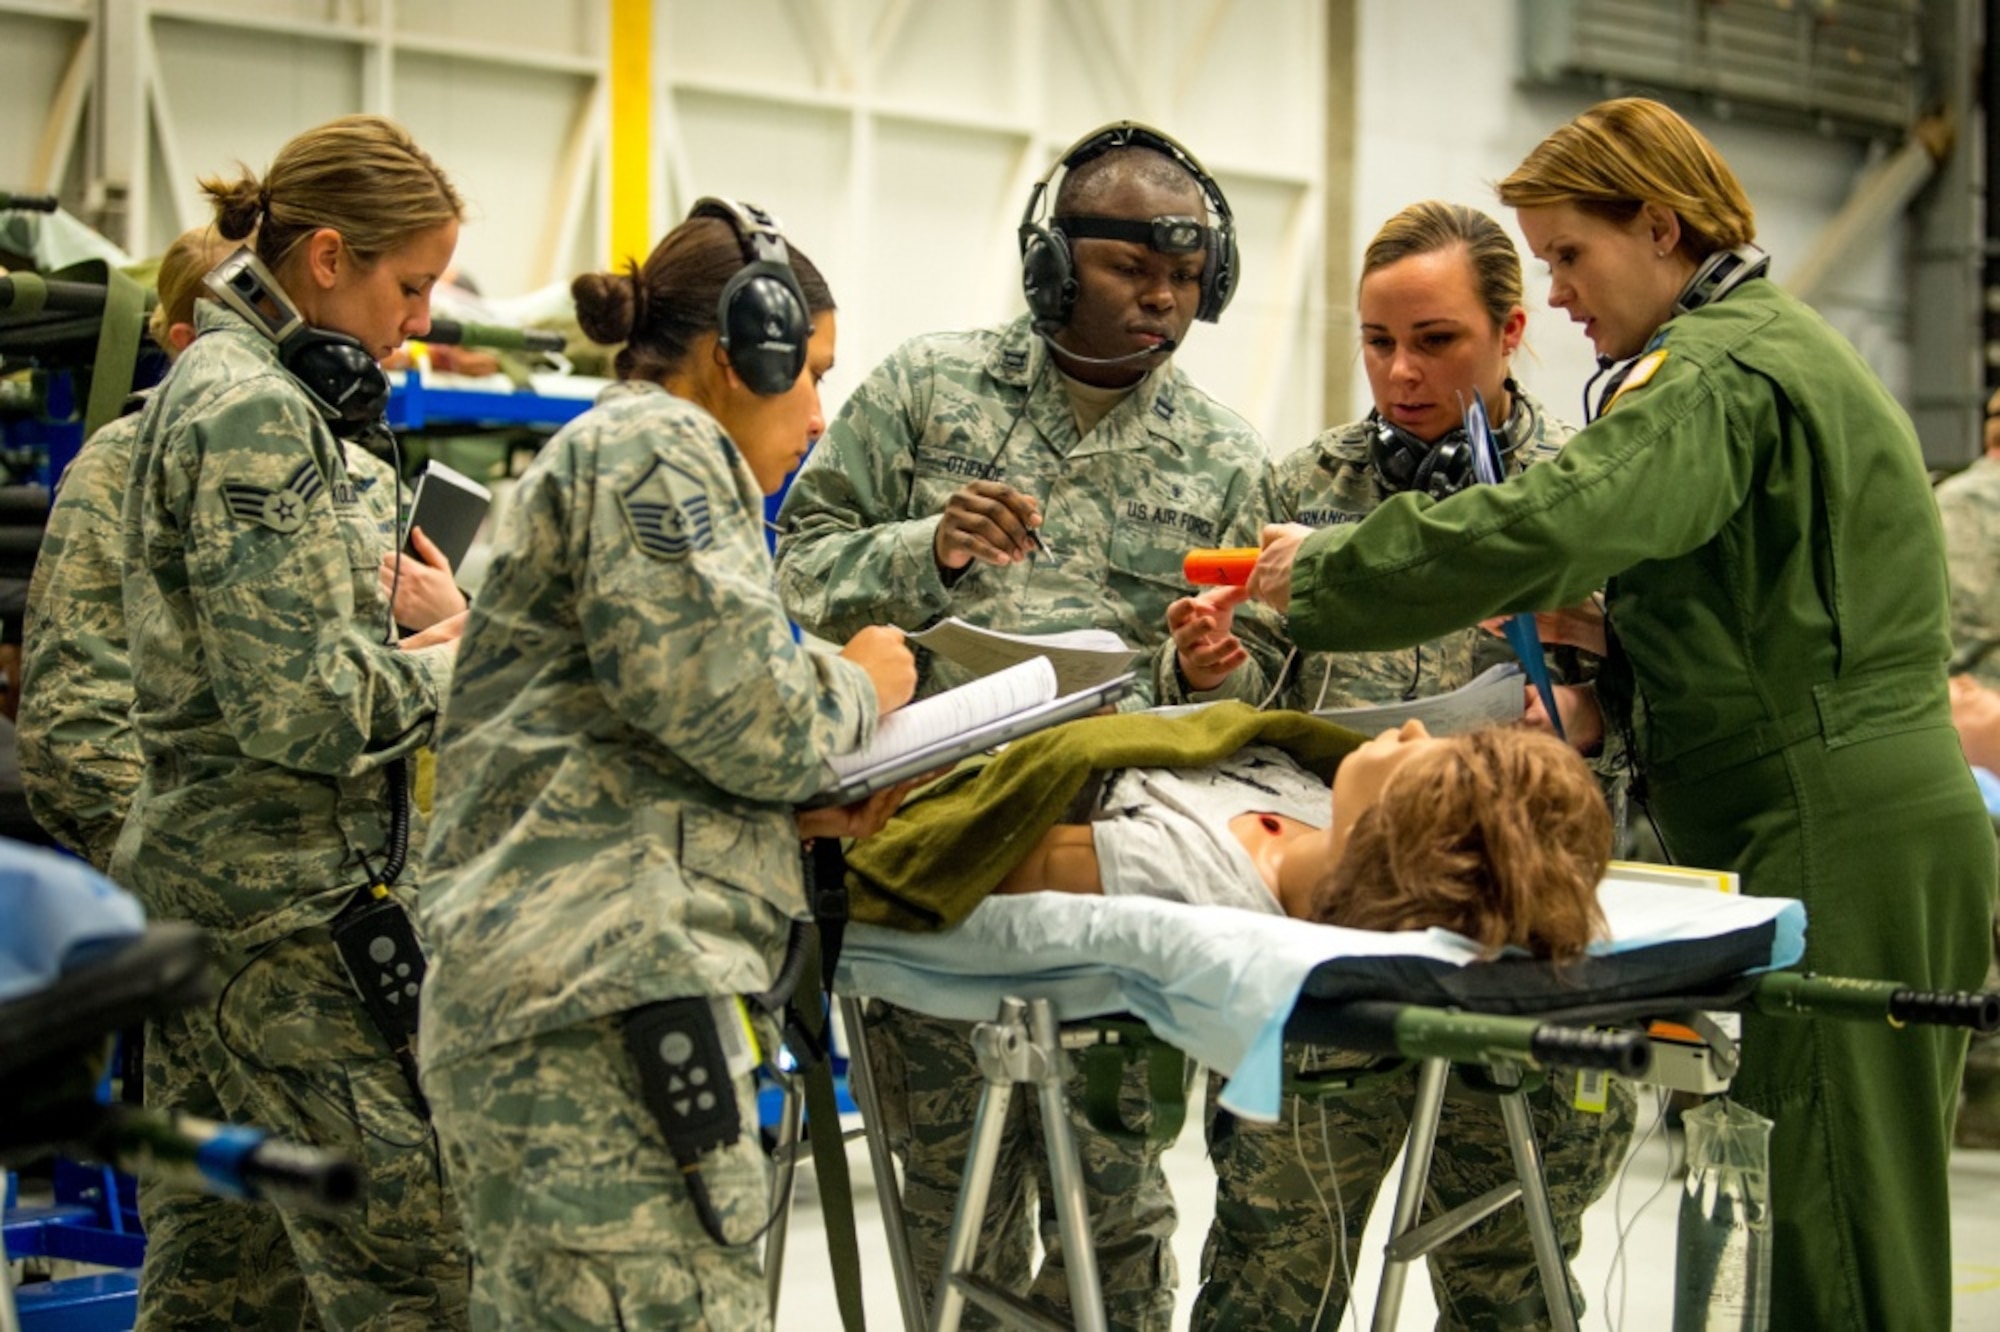 Flight Nurse and Aeromedical Technician Course students discuss patient briefs from actual Aeromedical Evacuation missions with their instructor, Capt. Sarah Johnson, right, before boarding a C-130 mockup to treat simulated patients at the 711th Human Performance Wing's U.S. Air Force School of Aerospace Medicine at Wright Patterson AFB, Ohio, Jan. 29, 2018. (U.S. Air Force photo by J.M. Eddins Jr.)